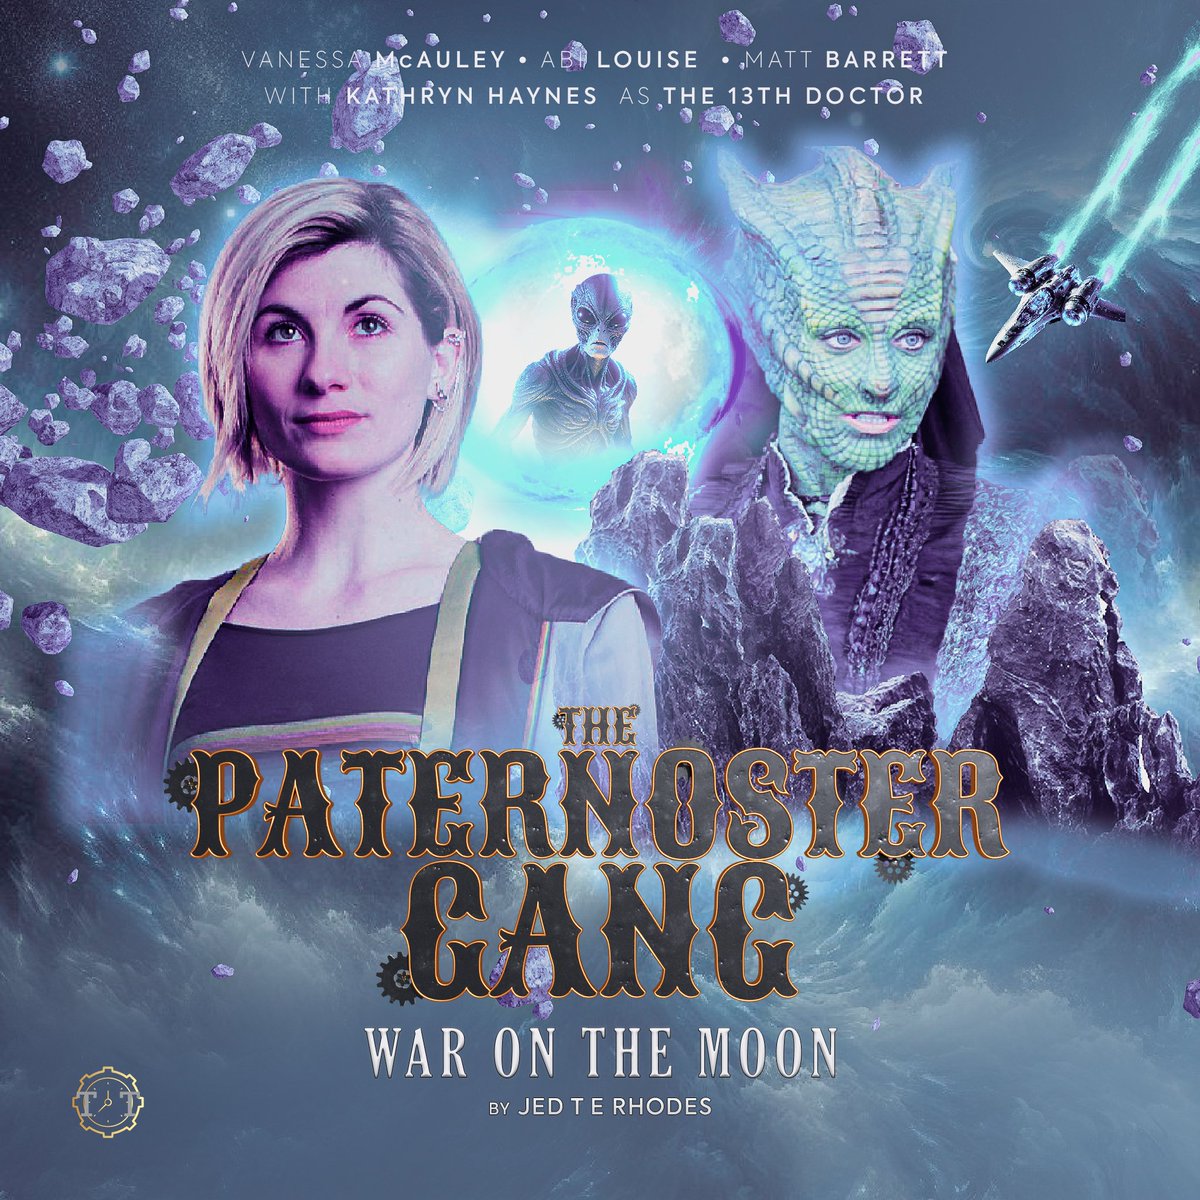 Cover reveal for our next Paternoster Gang fan audio 🦎💙🥔  #doctorwhofanaudio #audiodrama #13thdoctor #thepaternostergang #madamevastra #strax #jennyflint #voiceacting #radiodrama